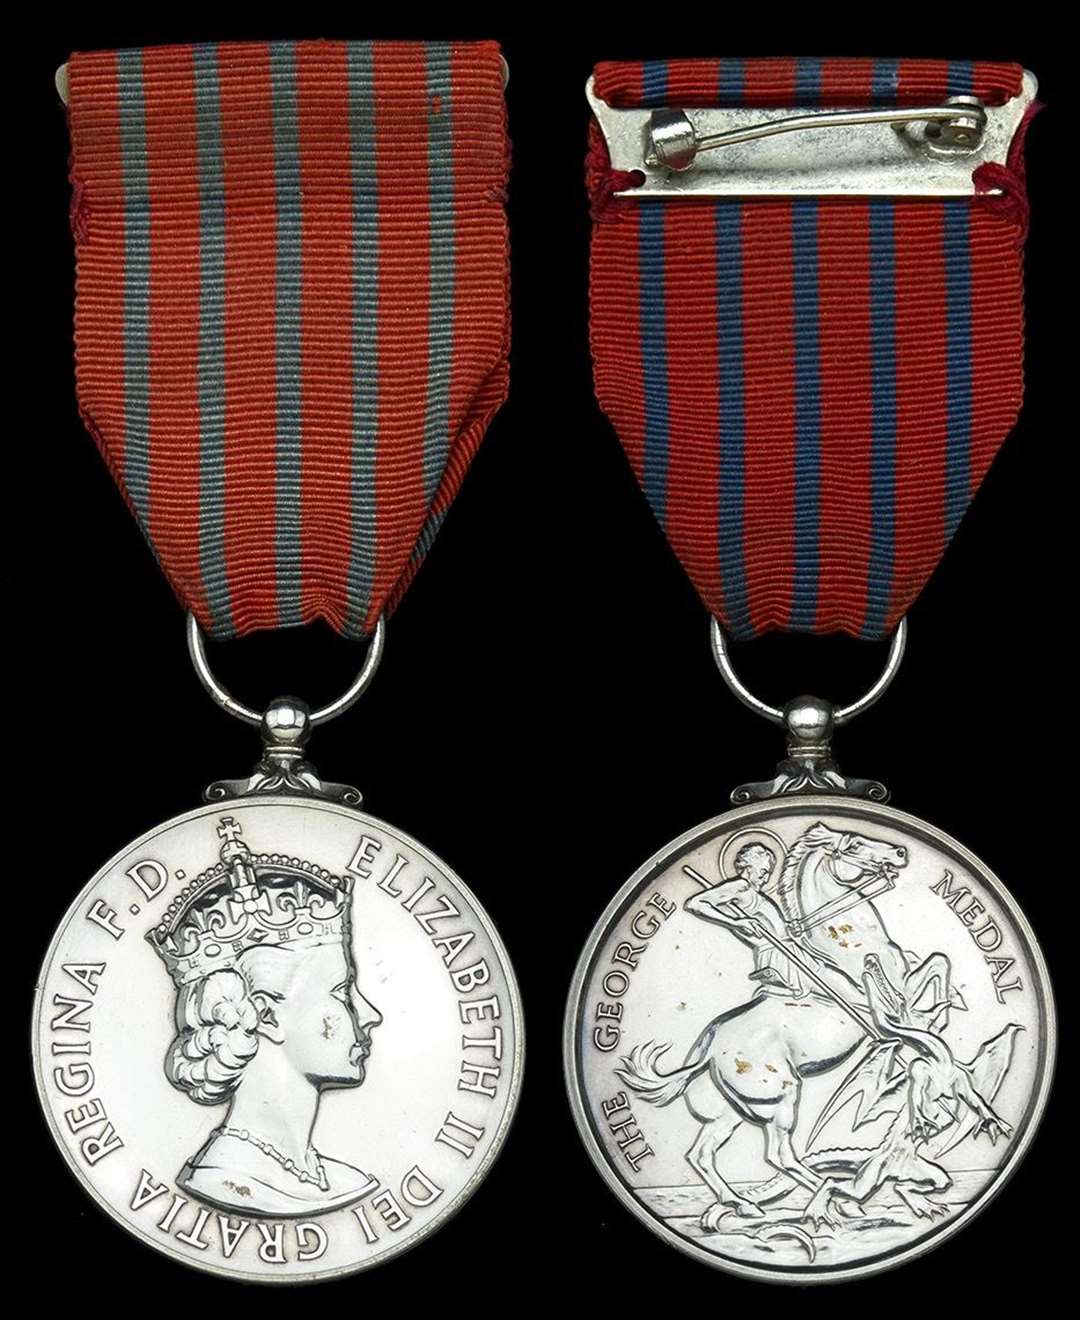 The medal was awarded to Mr Russell for bravery. Picture: Dix Noonan Webb